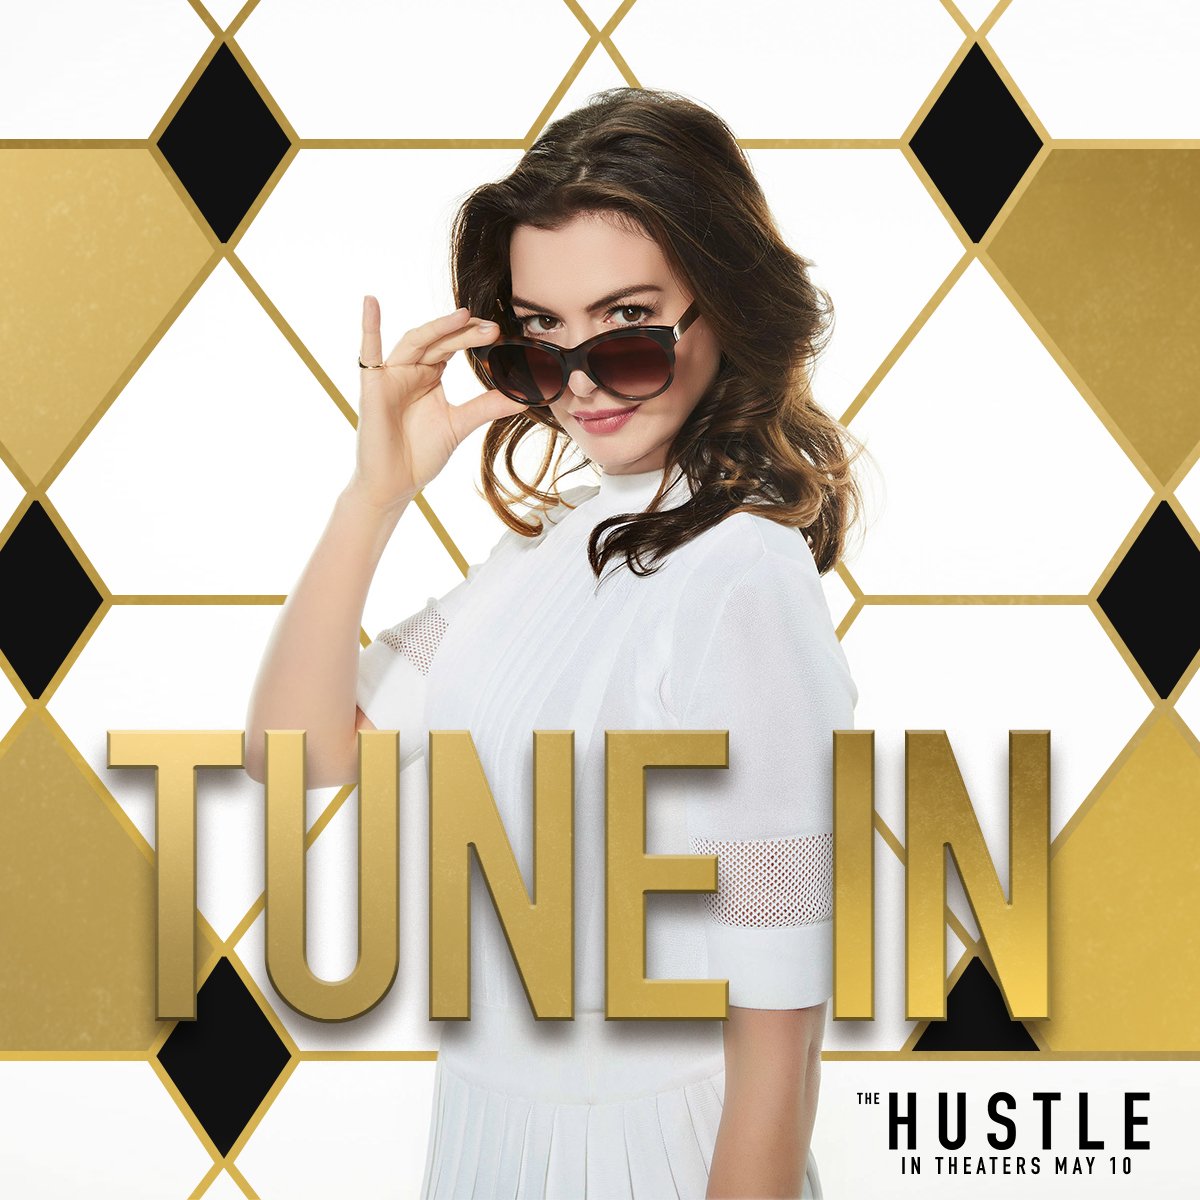 Anne Hathaway in movie poster for The Hustle